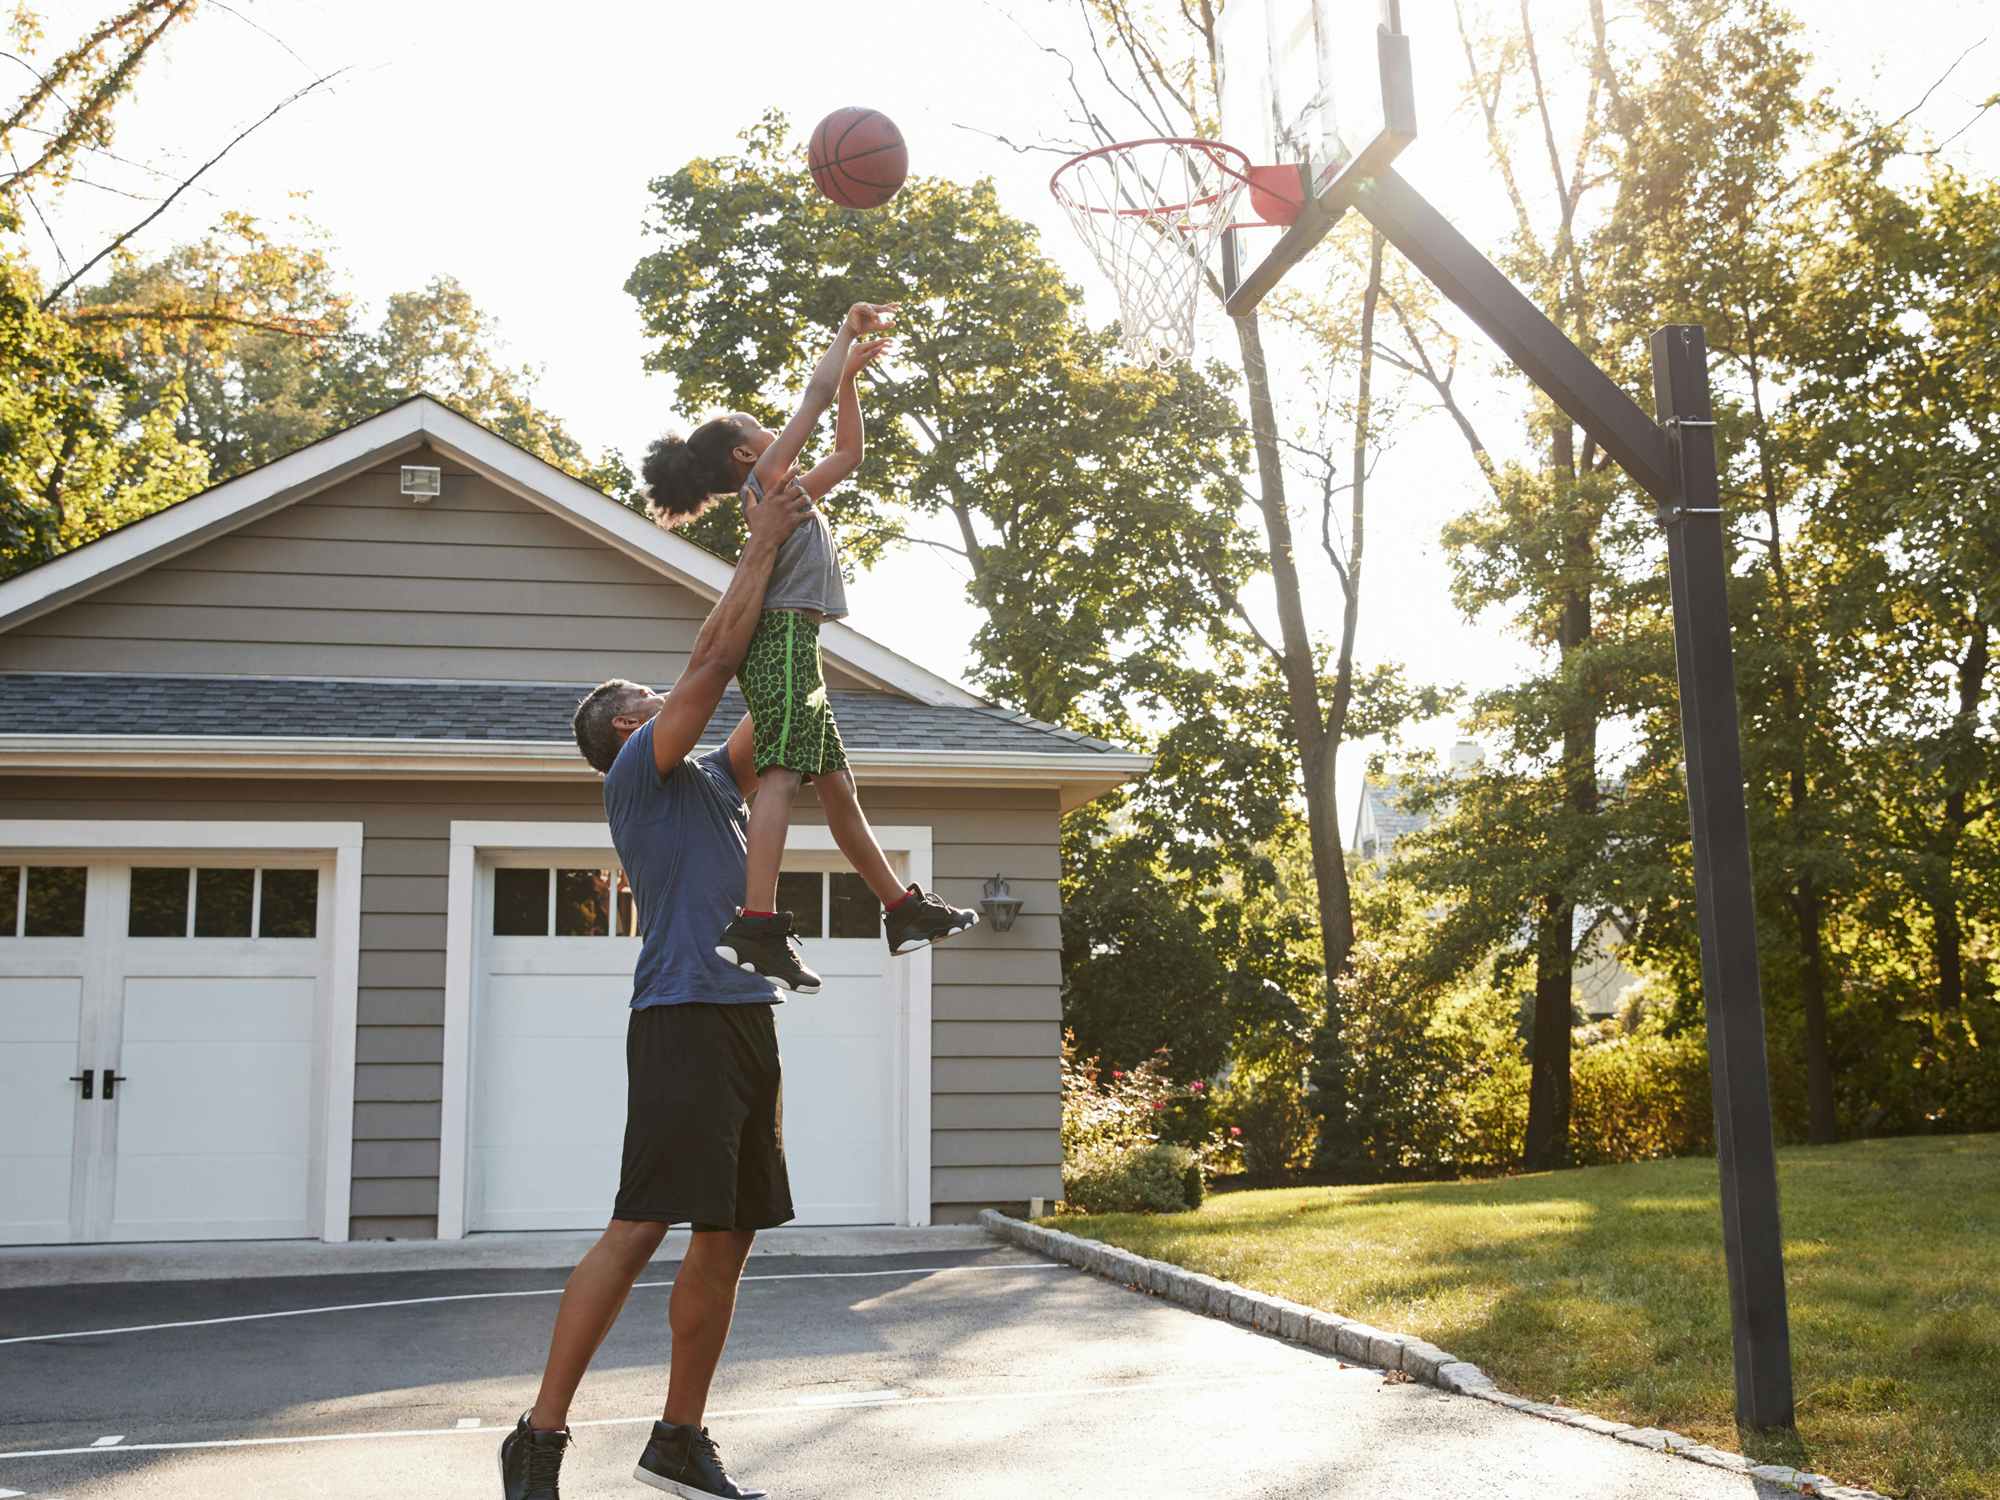 father playing basketball game with child in driveway